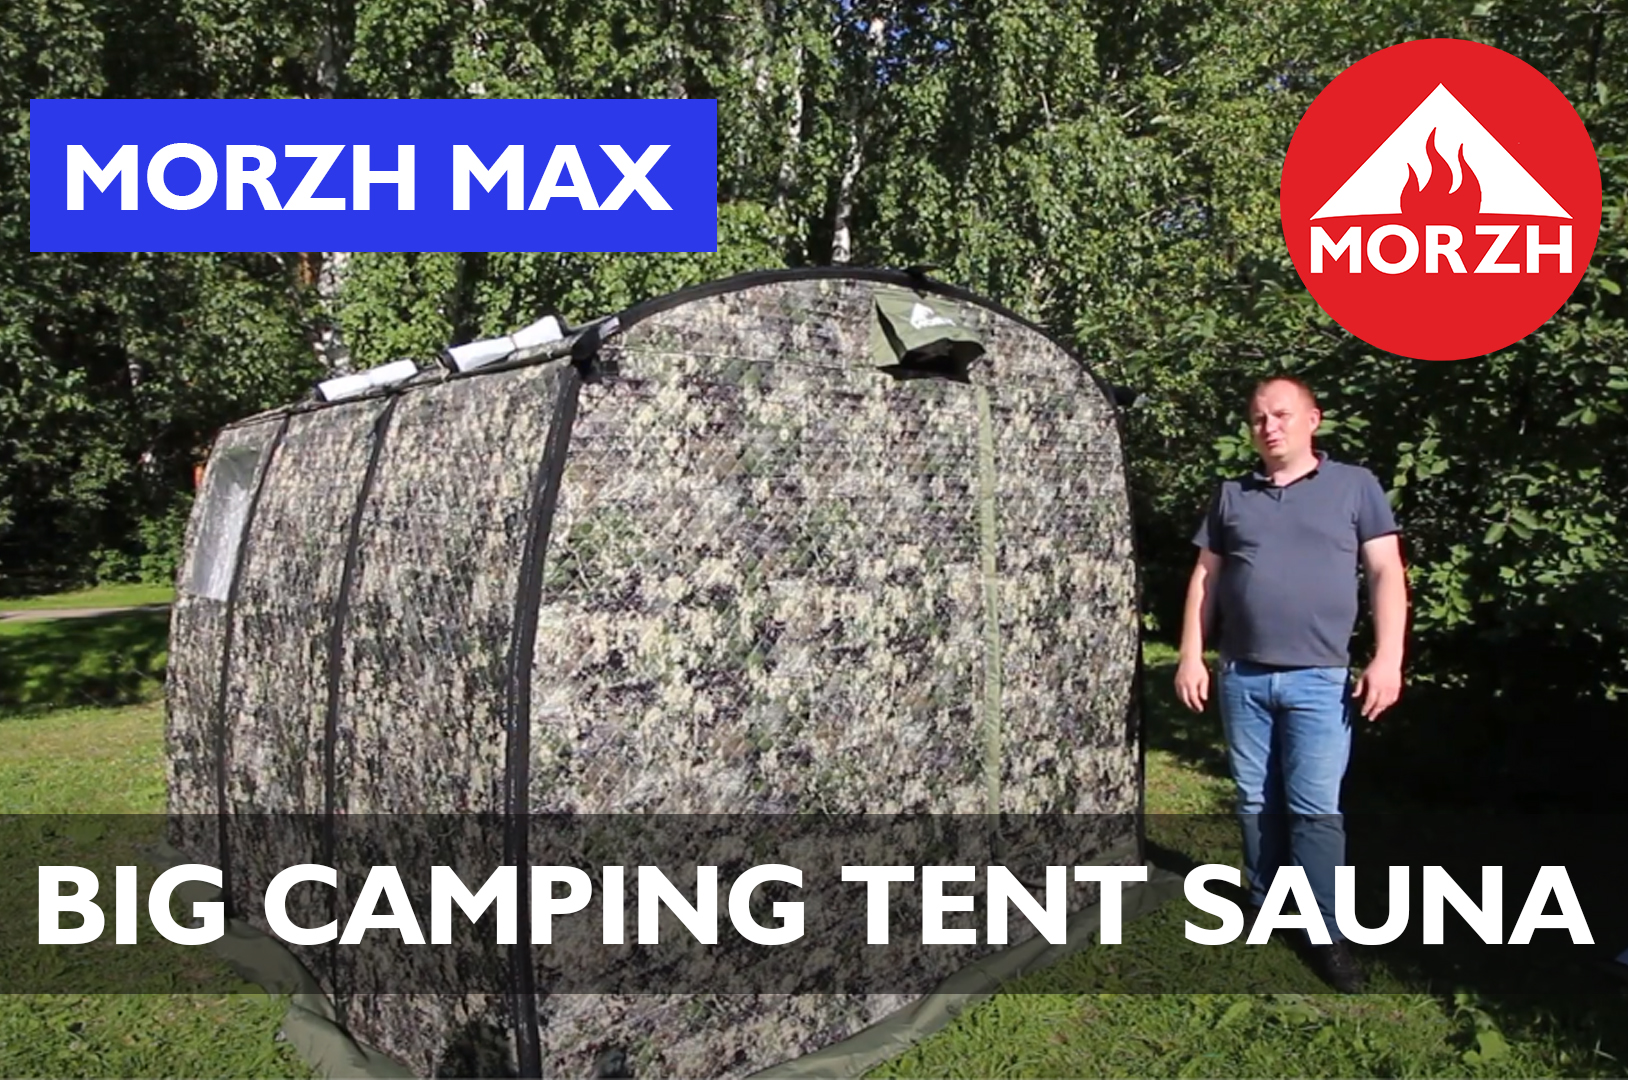 REVIEW AND ASSEMBLY OF THE BIGGEST TENT SAUNA MORZH MAX